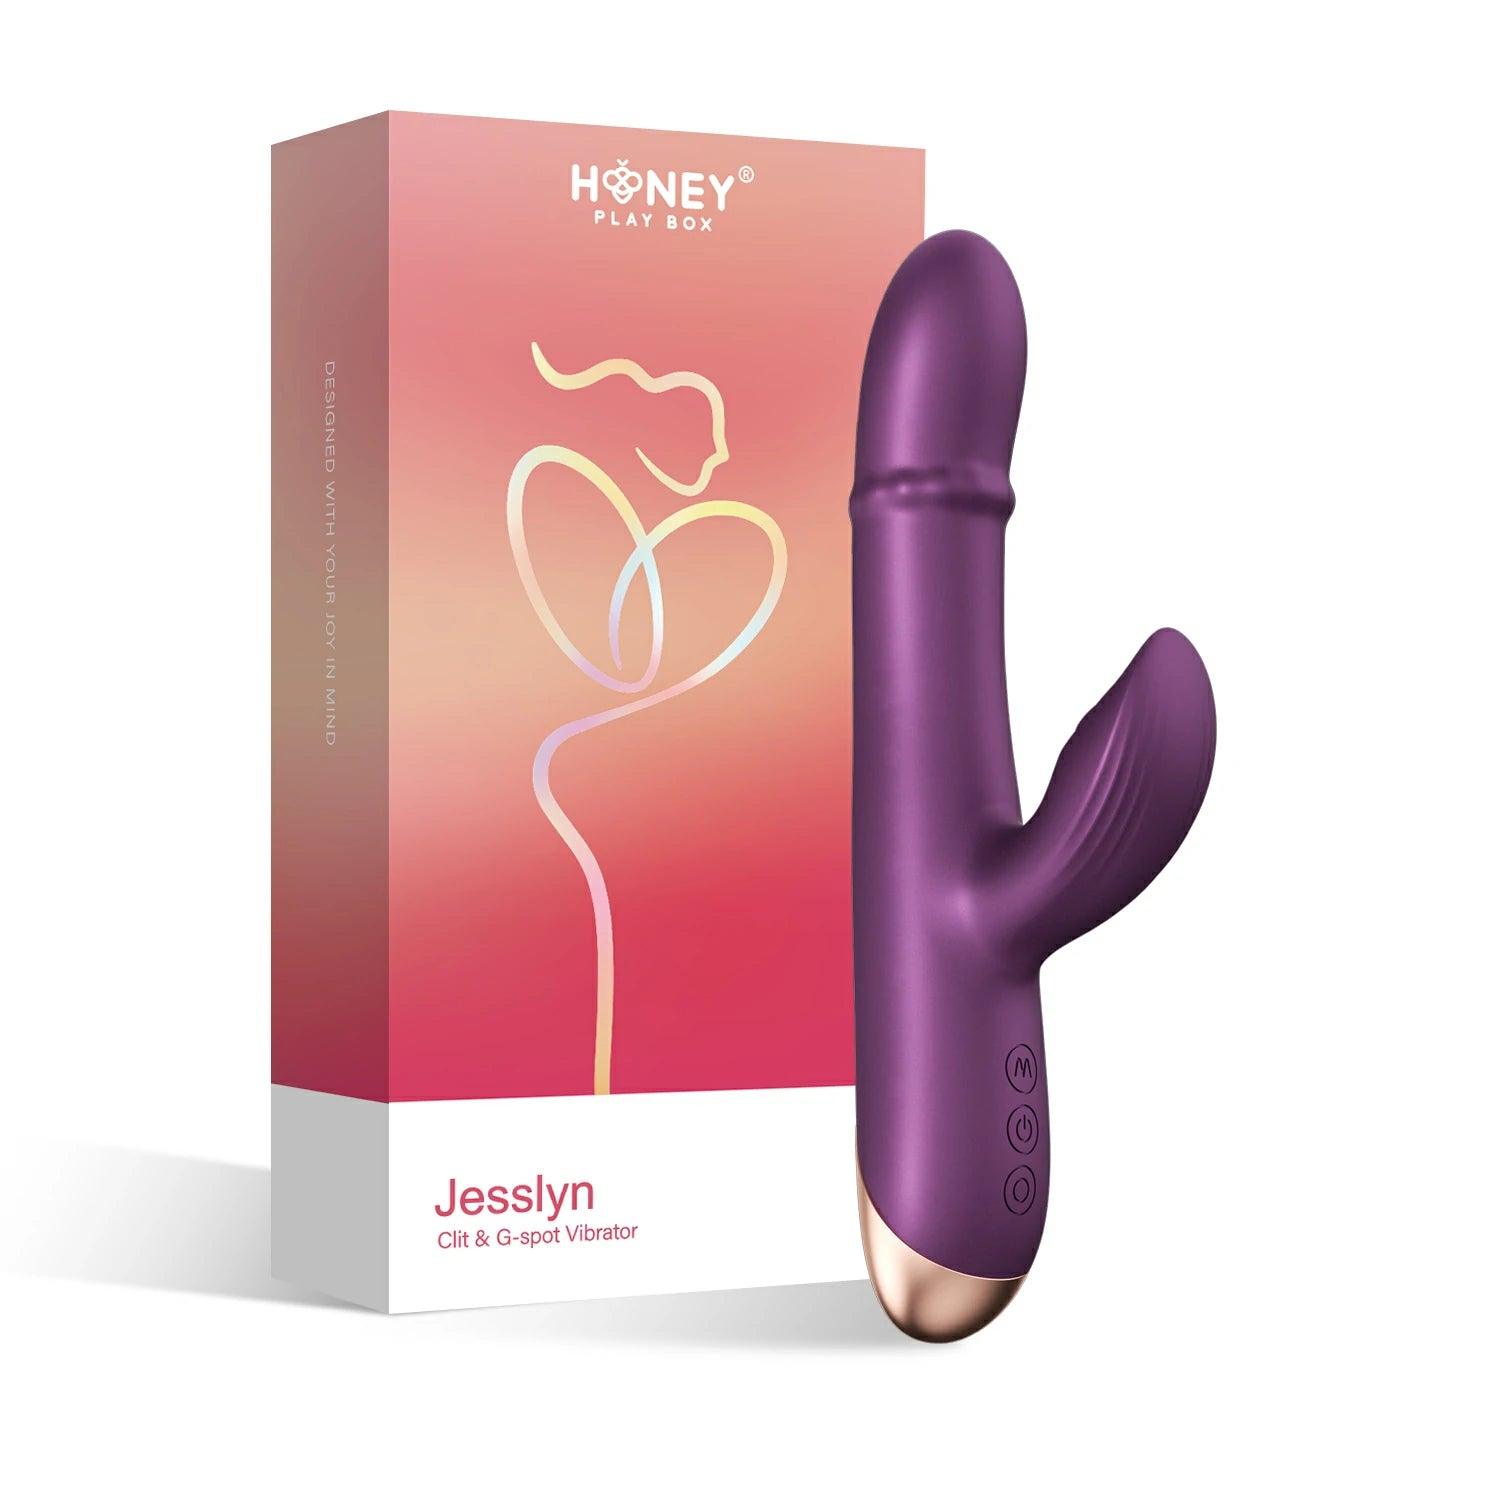 JESSLYN Tapping Clit Stimulator G-spot Vibrator with Sliding Beads Ring - Honey Play Box Official